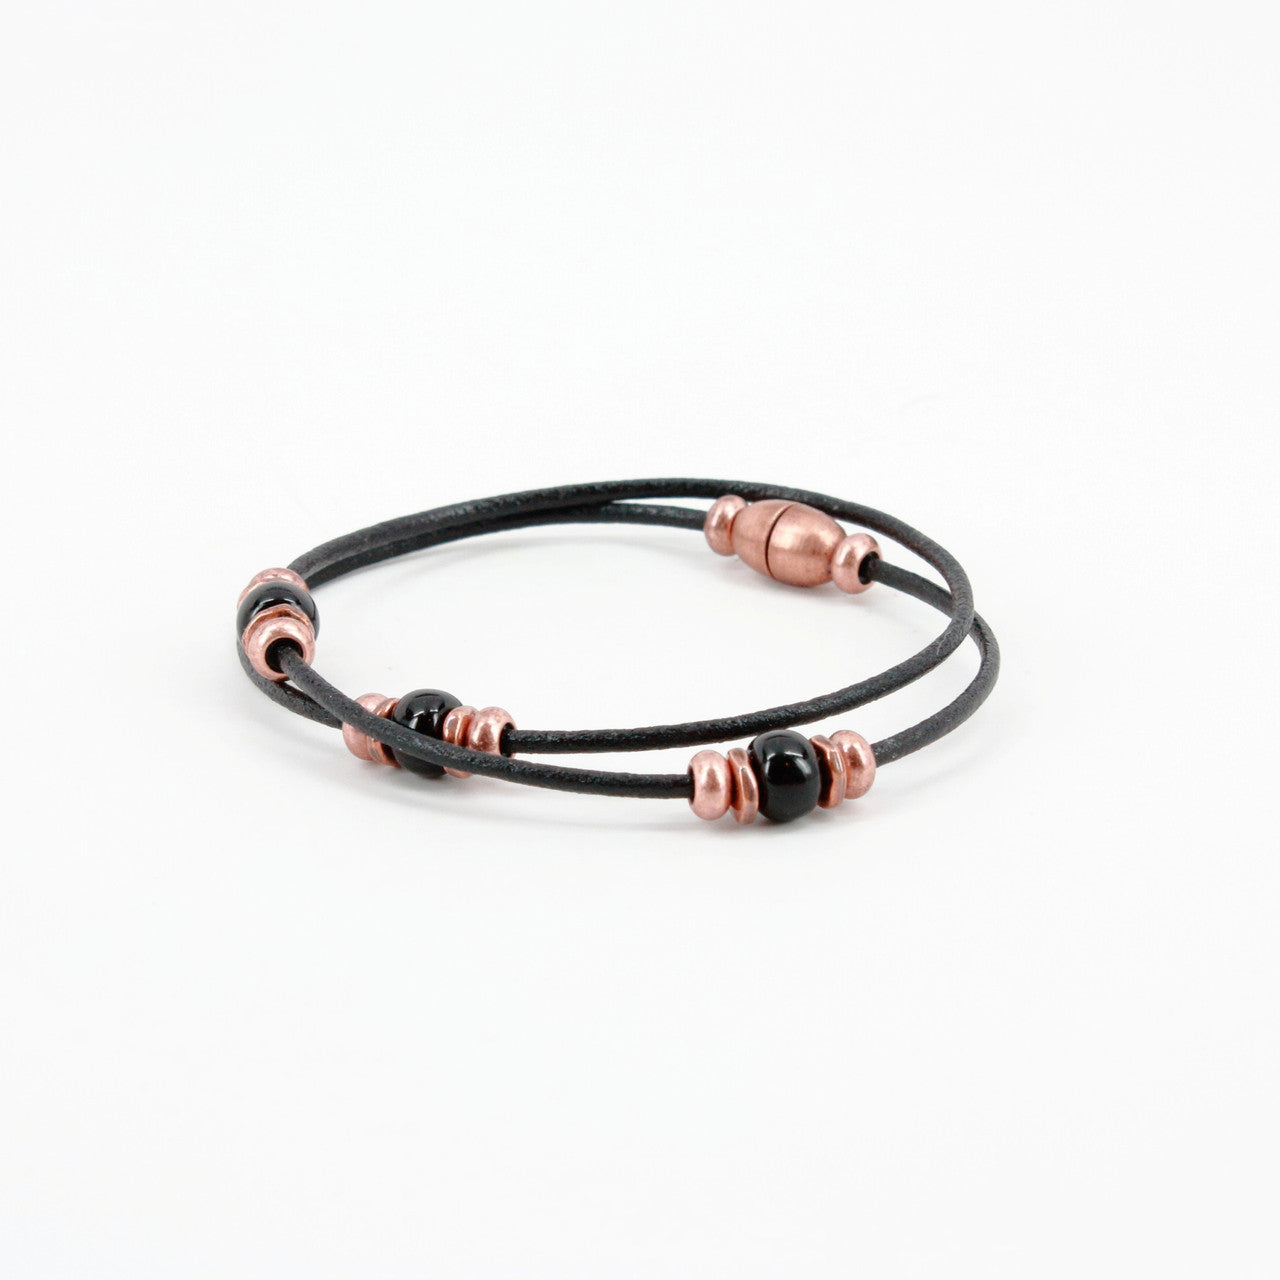 Harness Leather Double Wrap Bracelet with Copper and Black Beads by Torino Leather